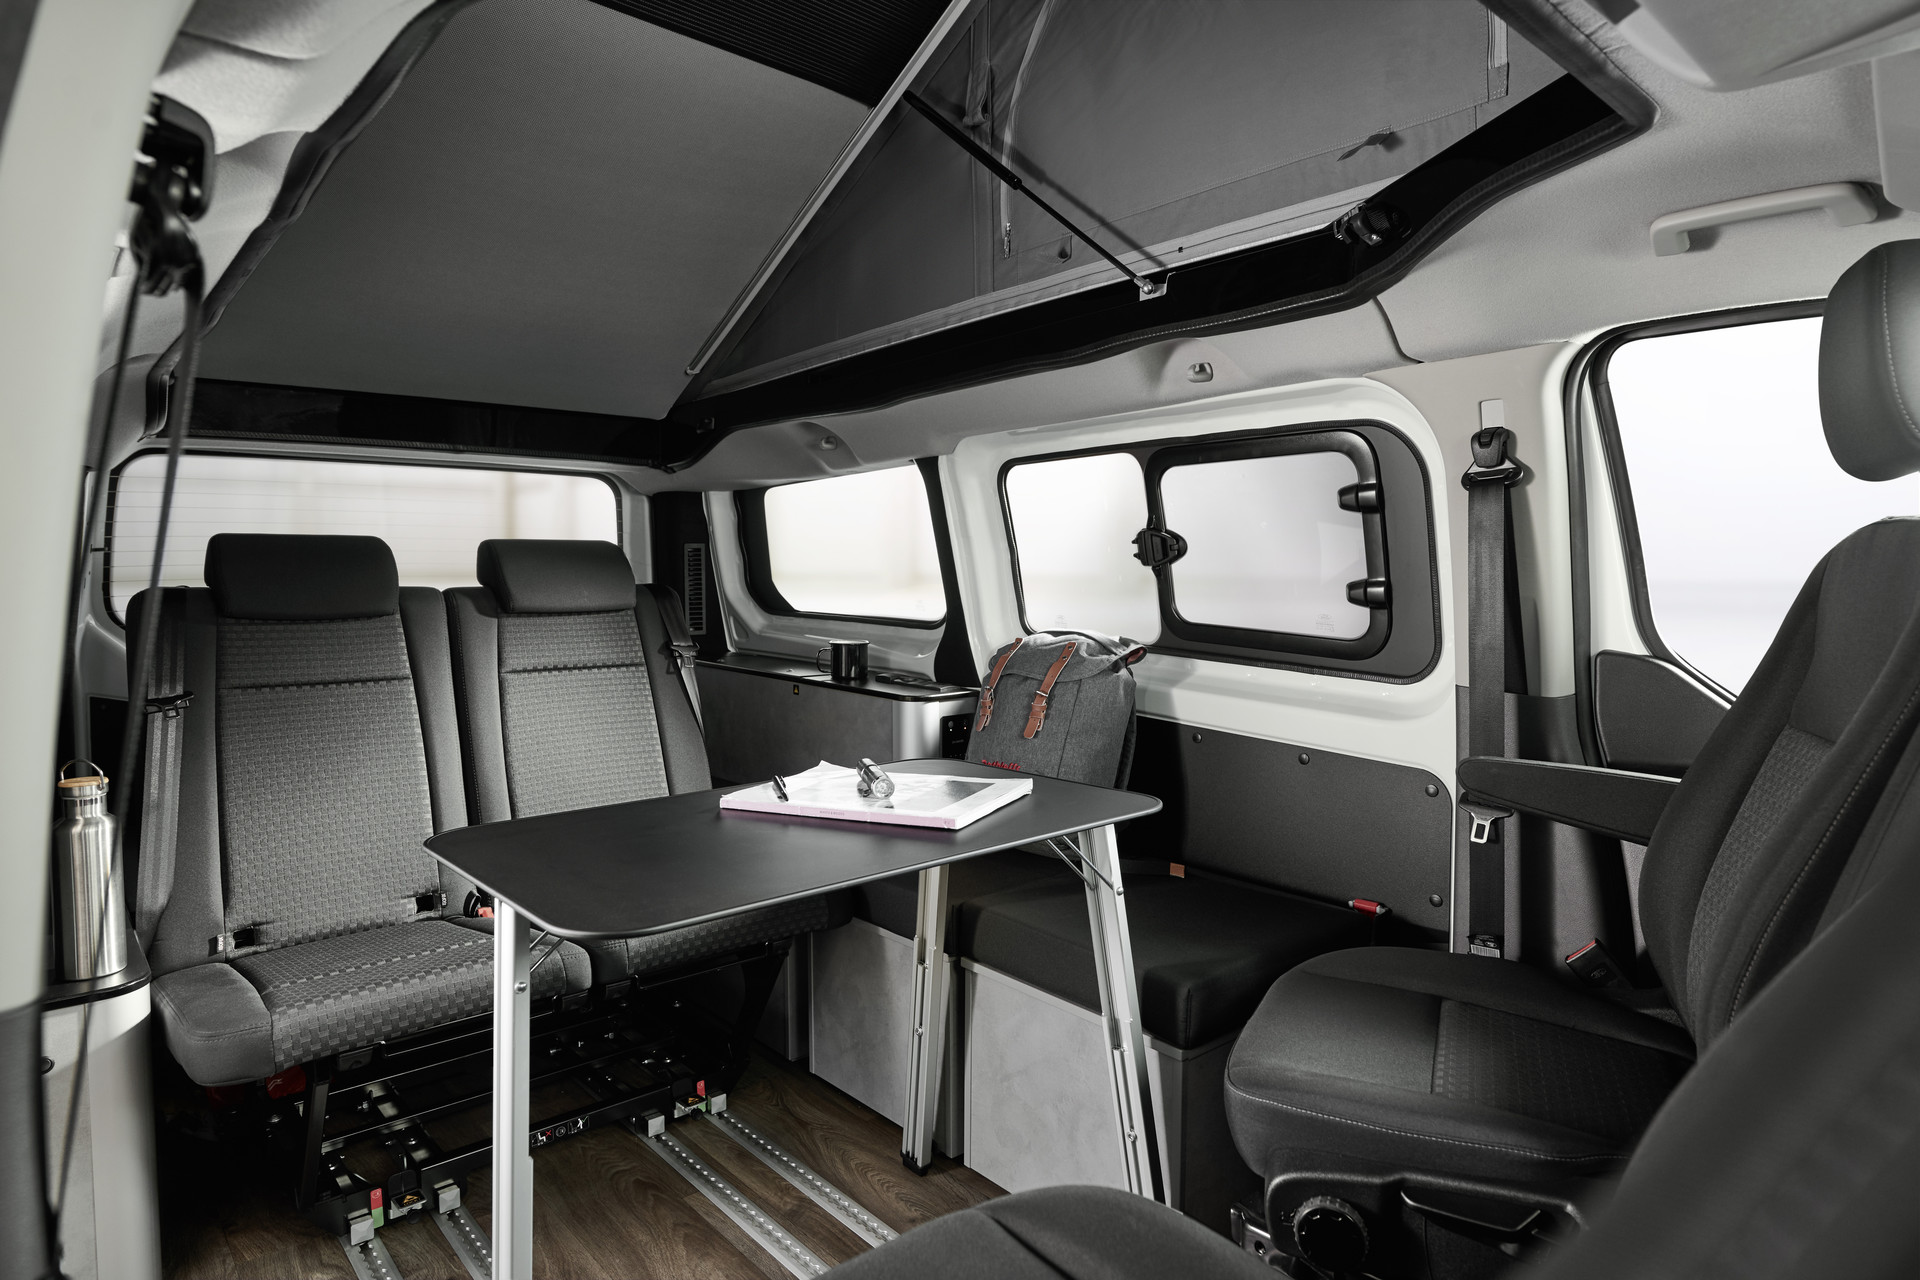 Together with the bench seat and the rotating front seats, the result is a generously sized living area with ample headroom.